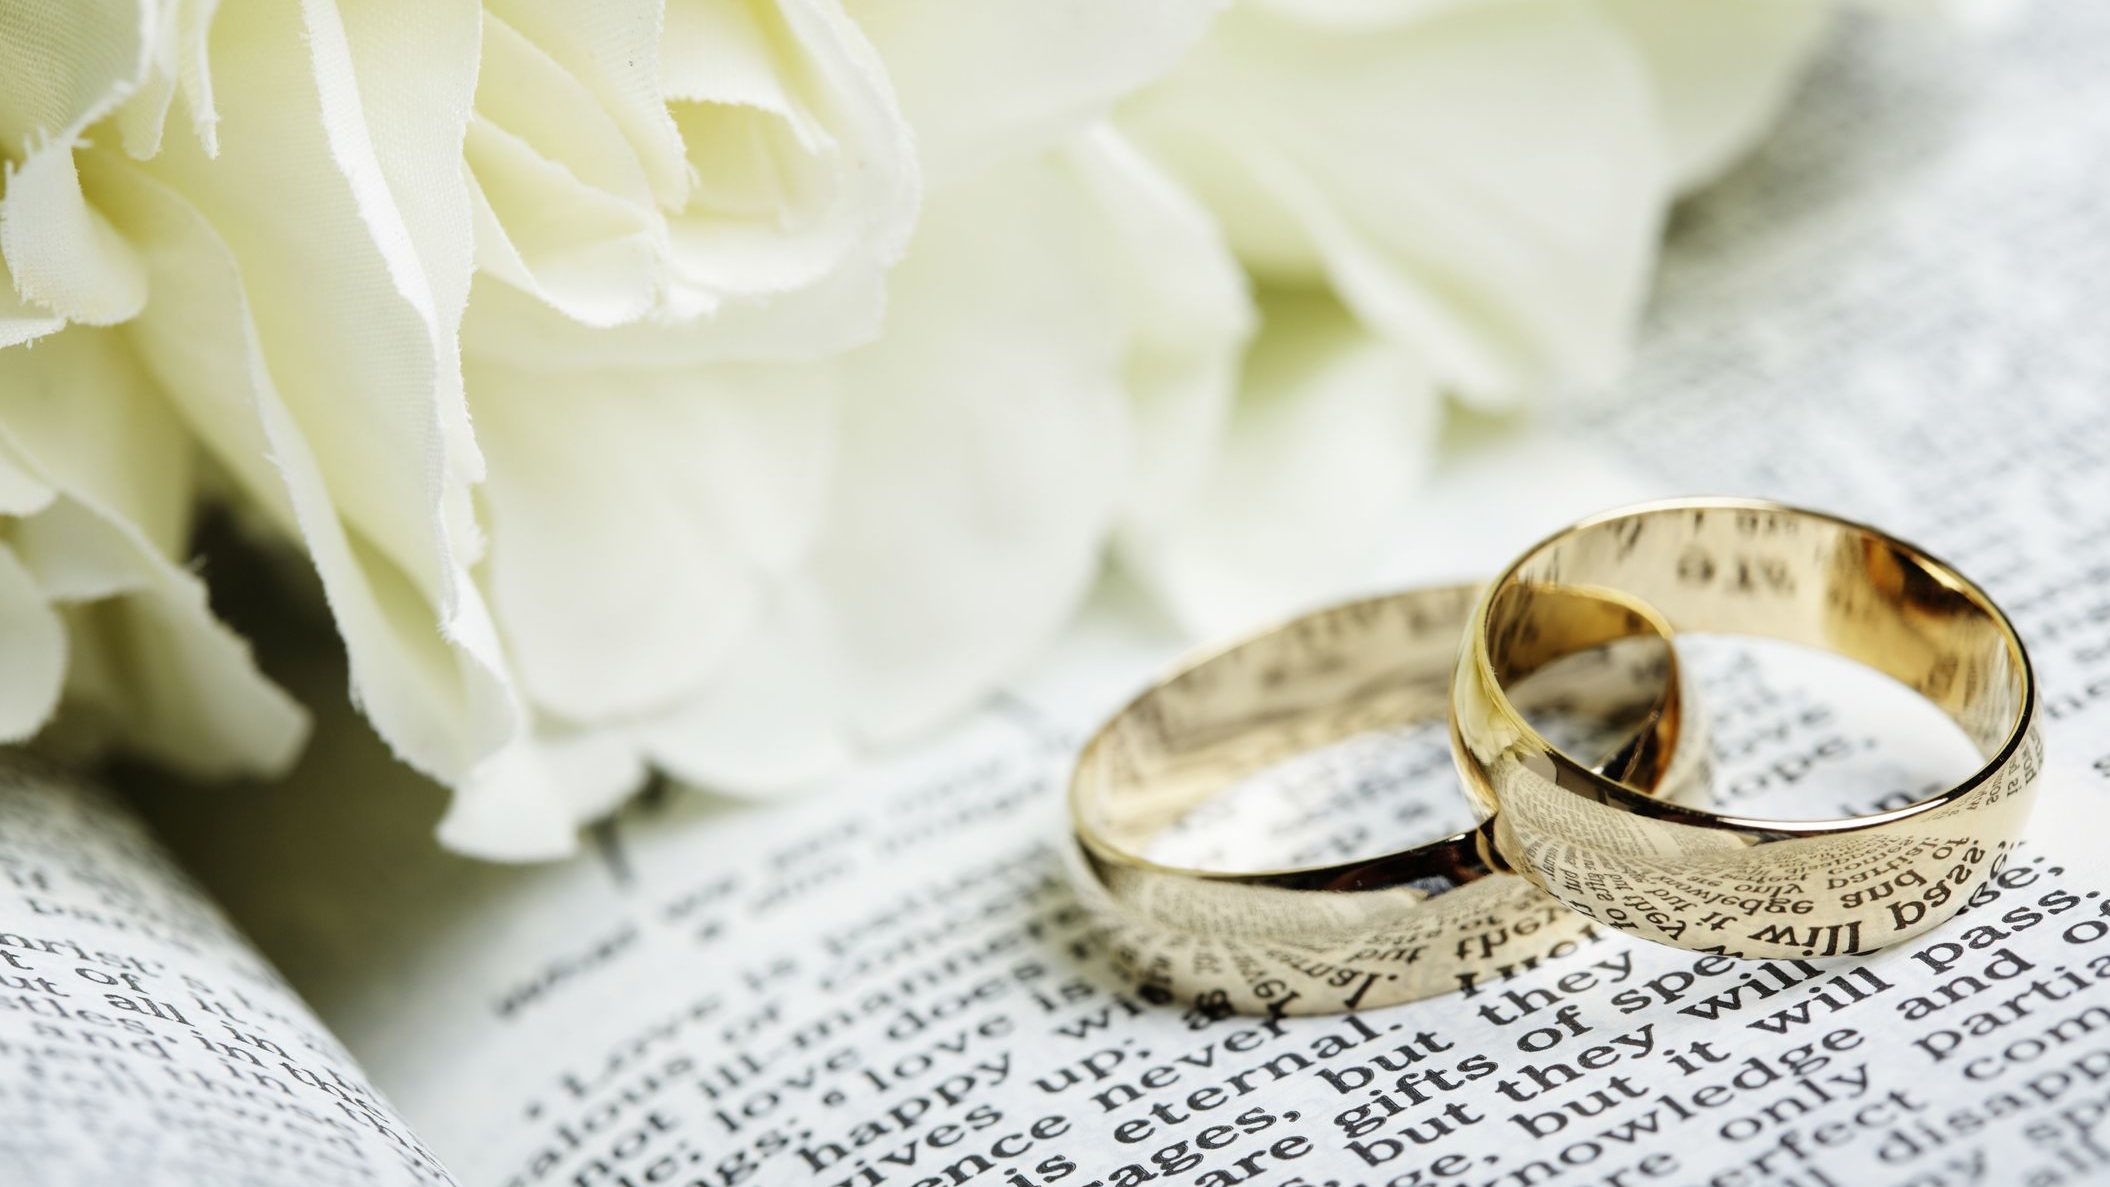 Civil Marriage Proponents in Israel Score Victory in Court Ruling